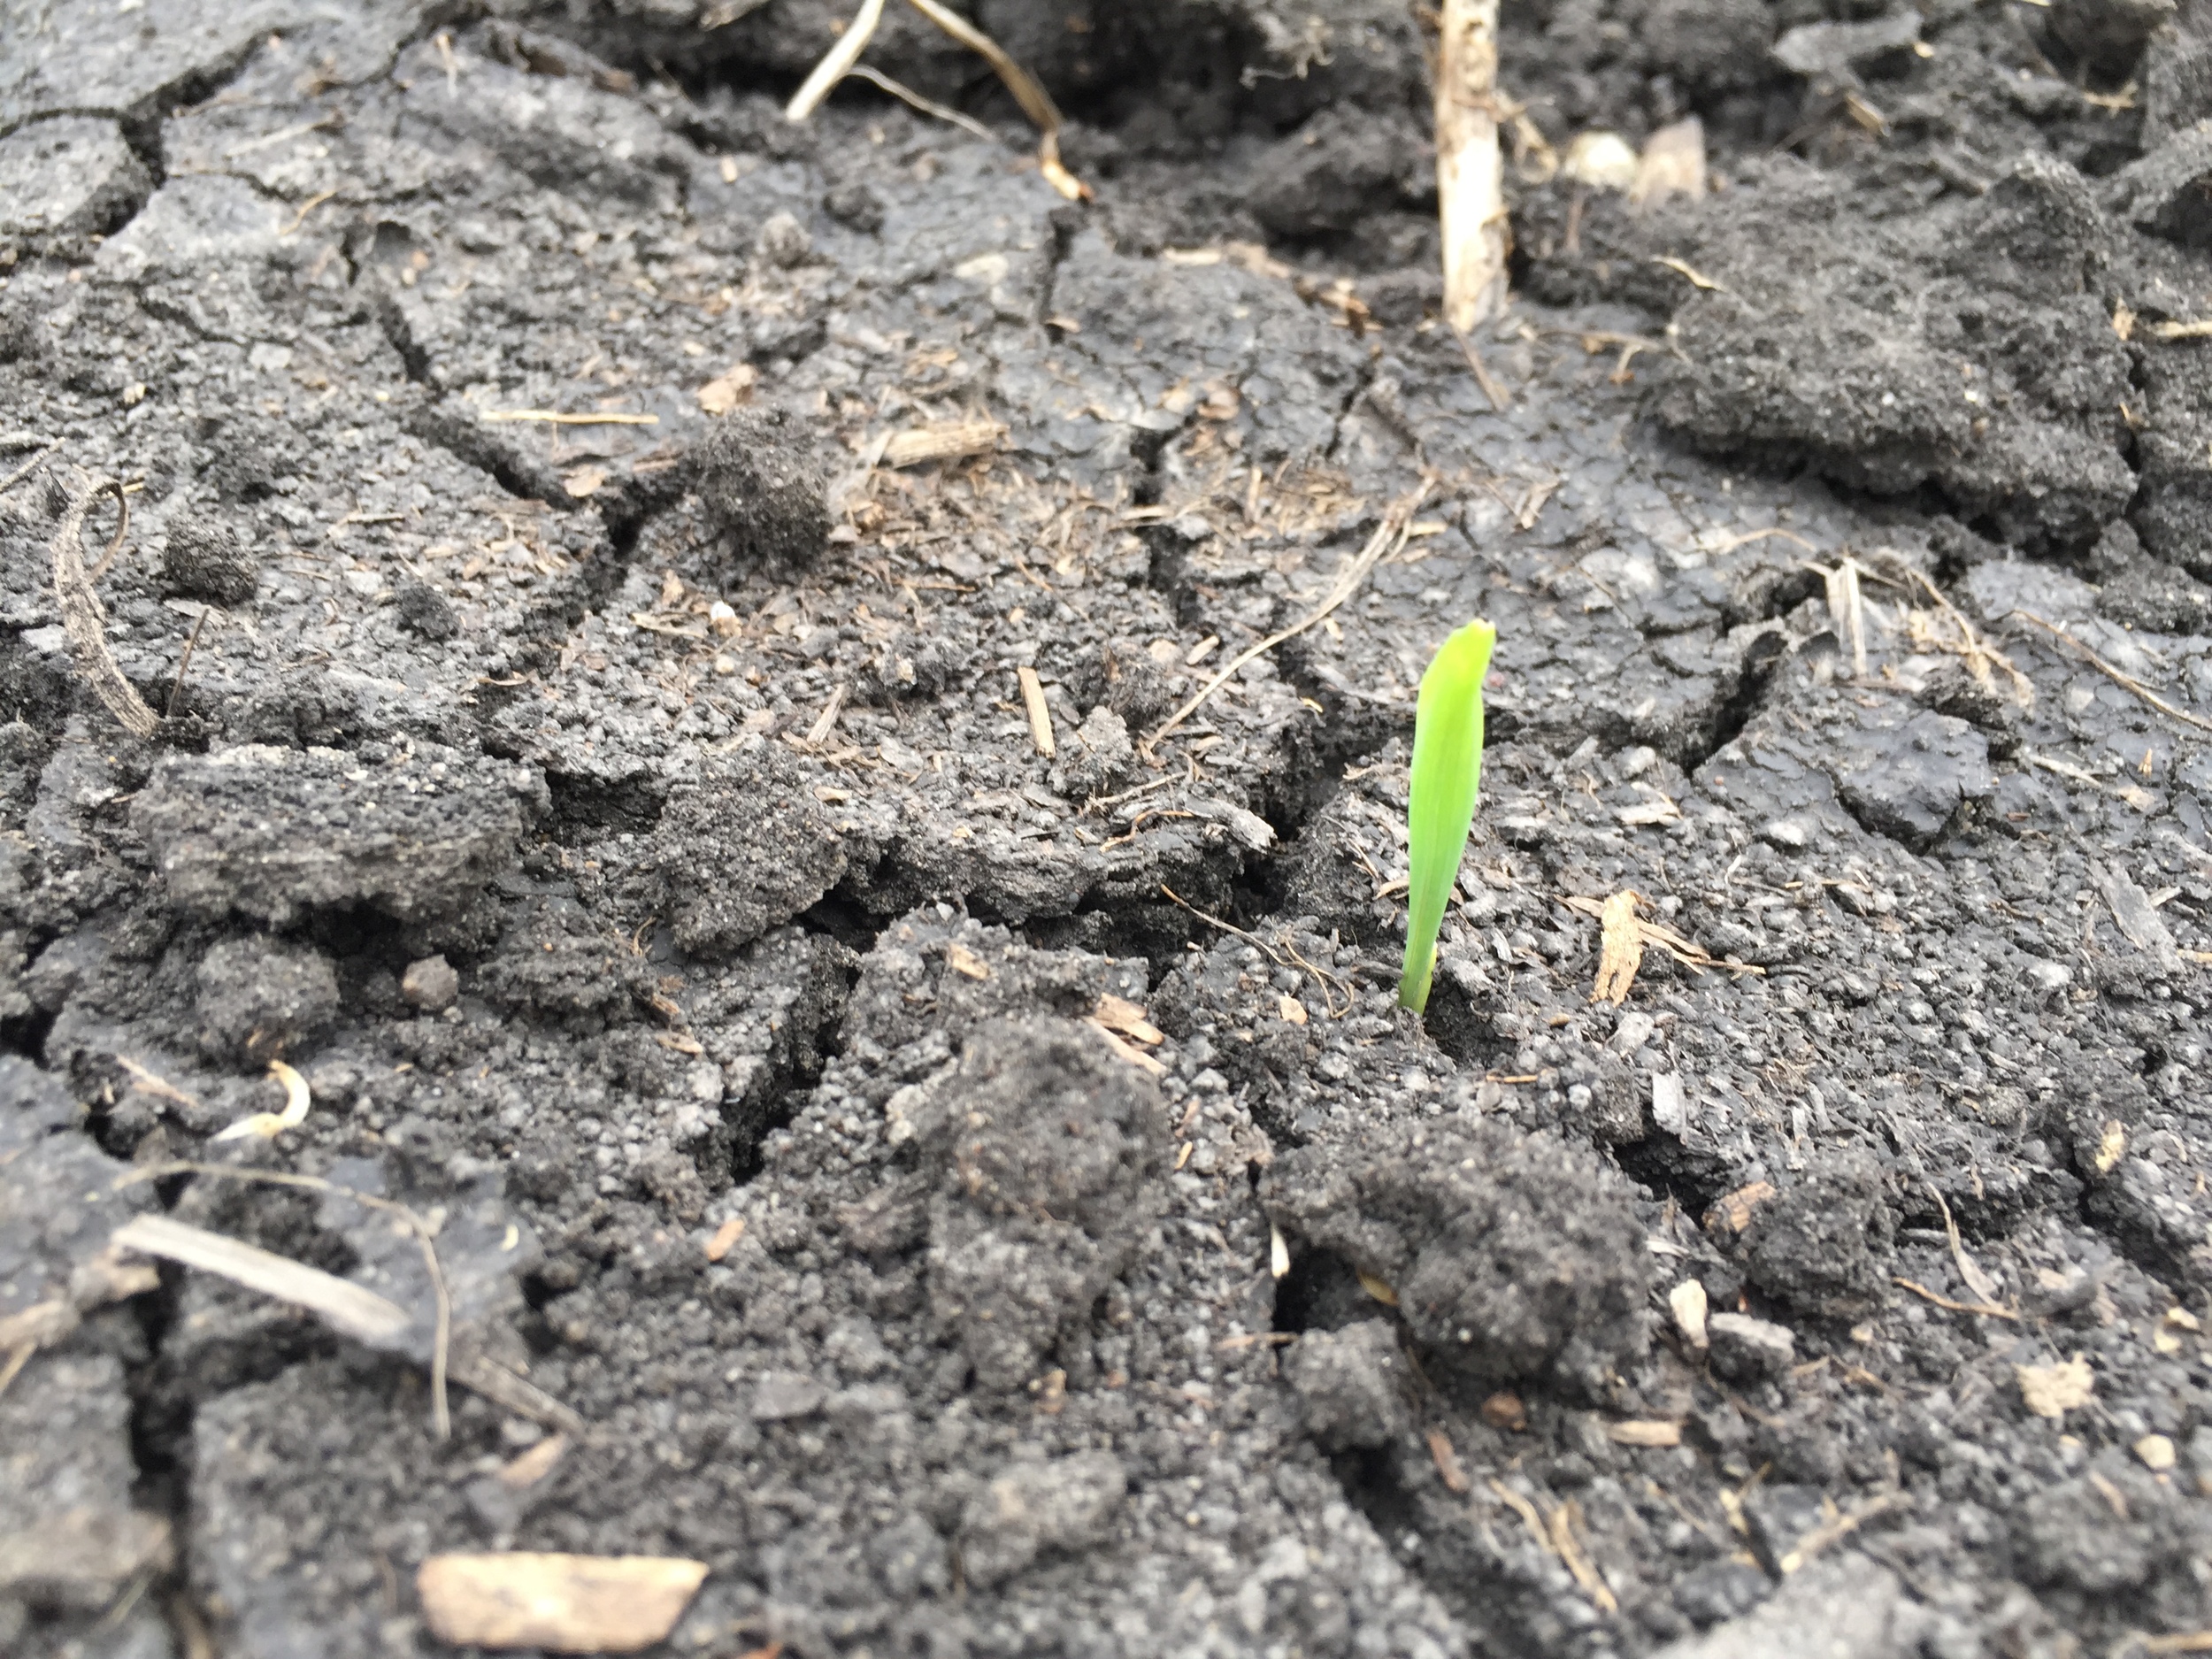  Baby corn that just sprouted 1-2 days ago. 